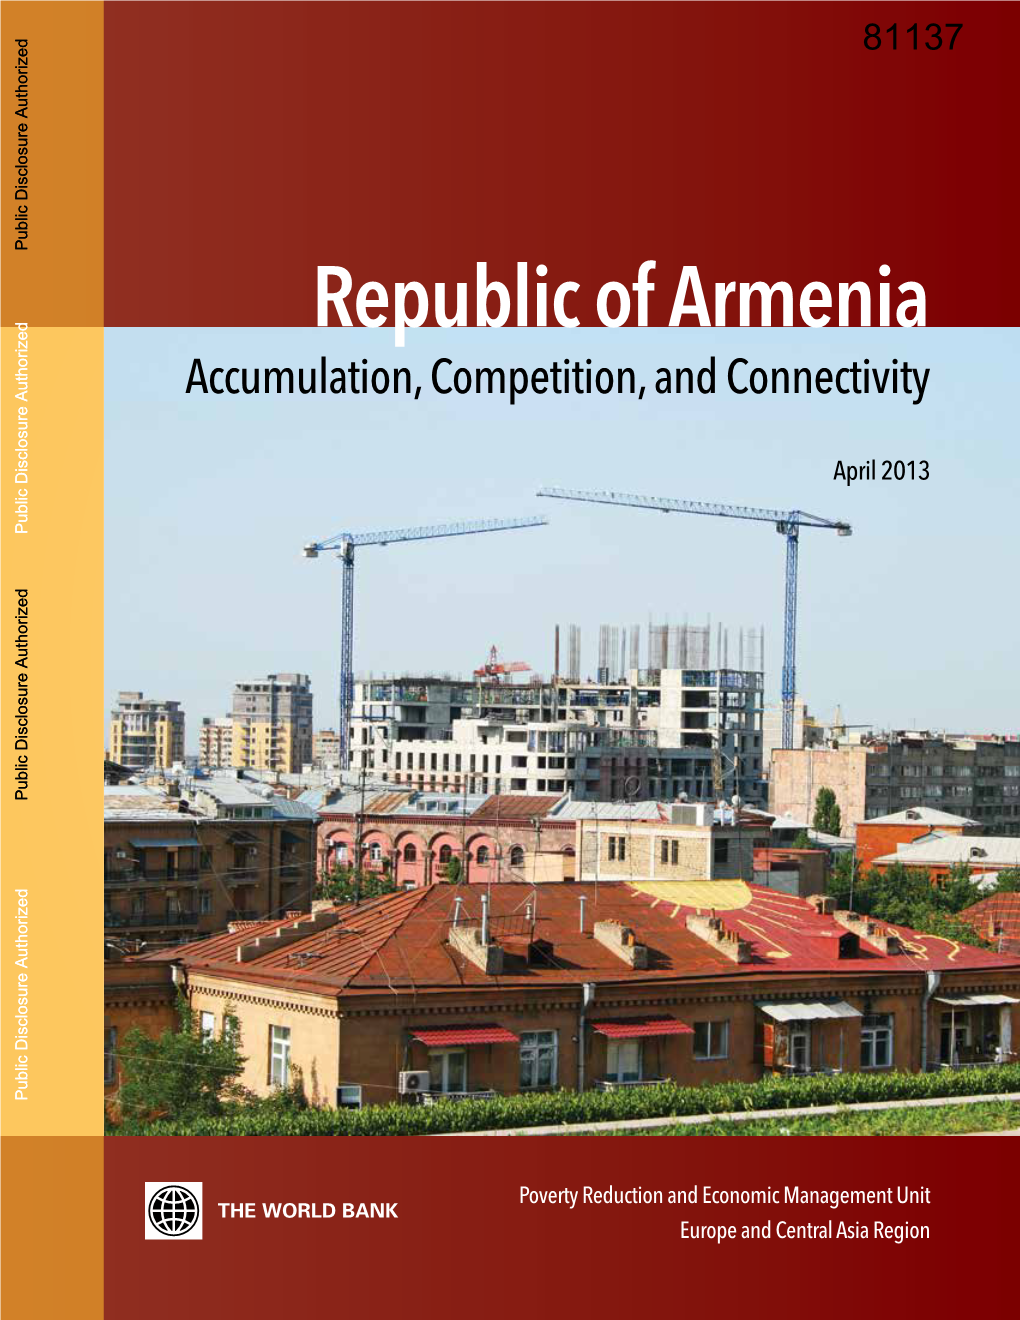 Republic of Armenia Accumulation, Competition, and Connectivity